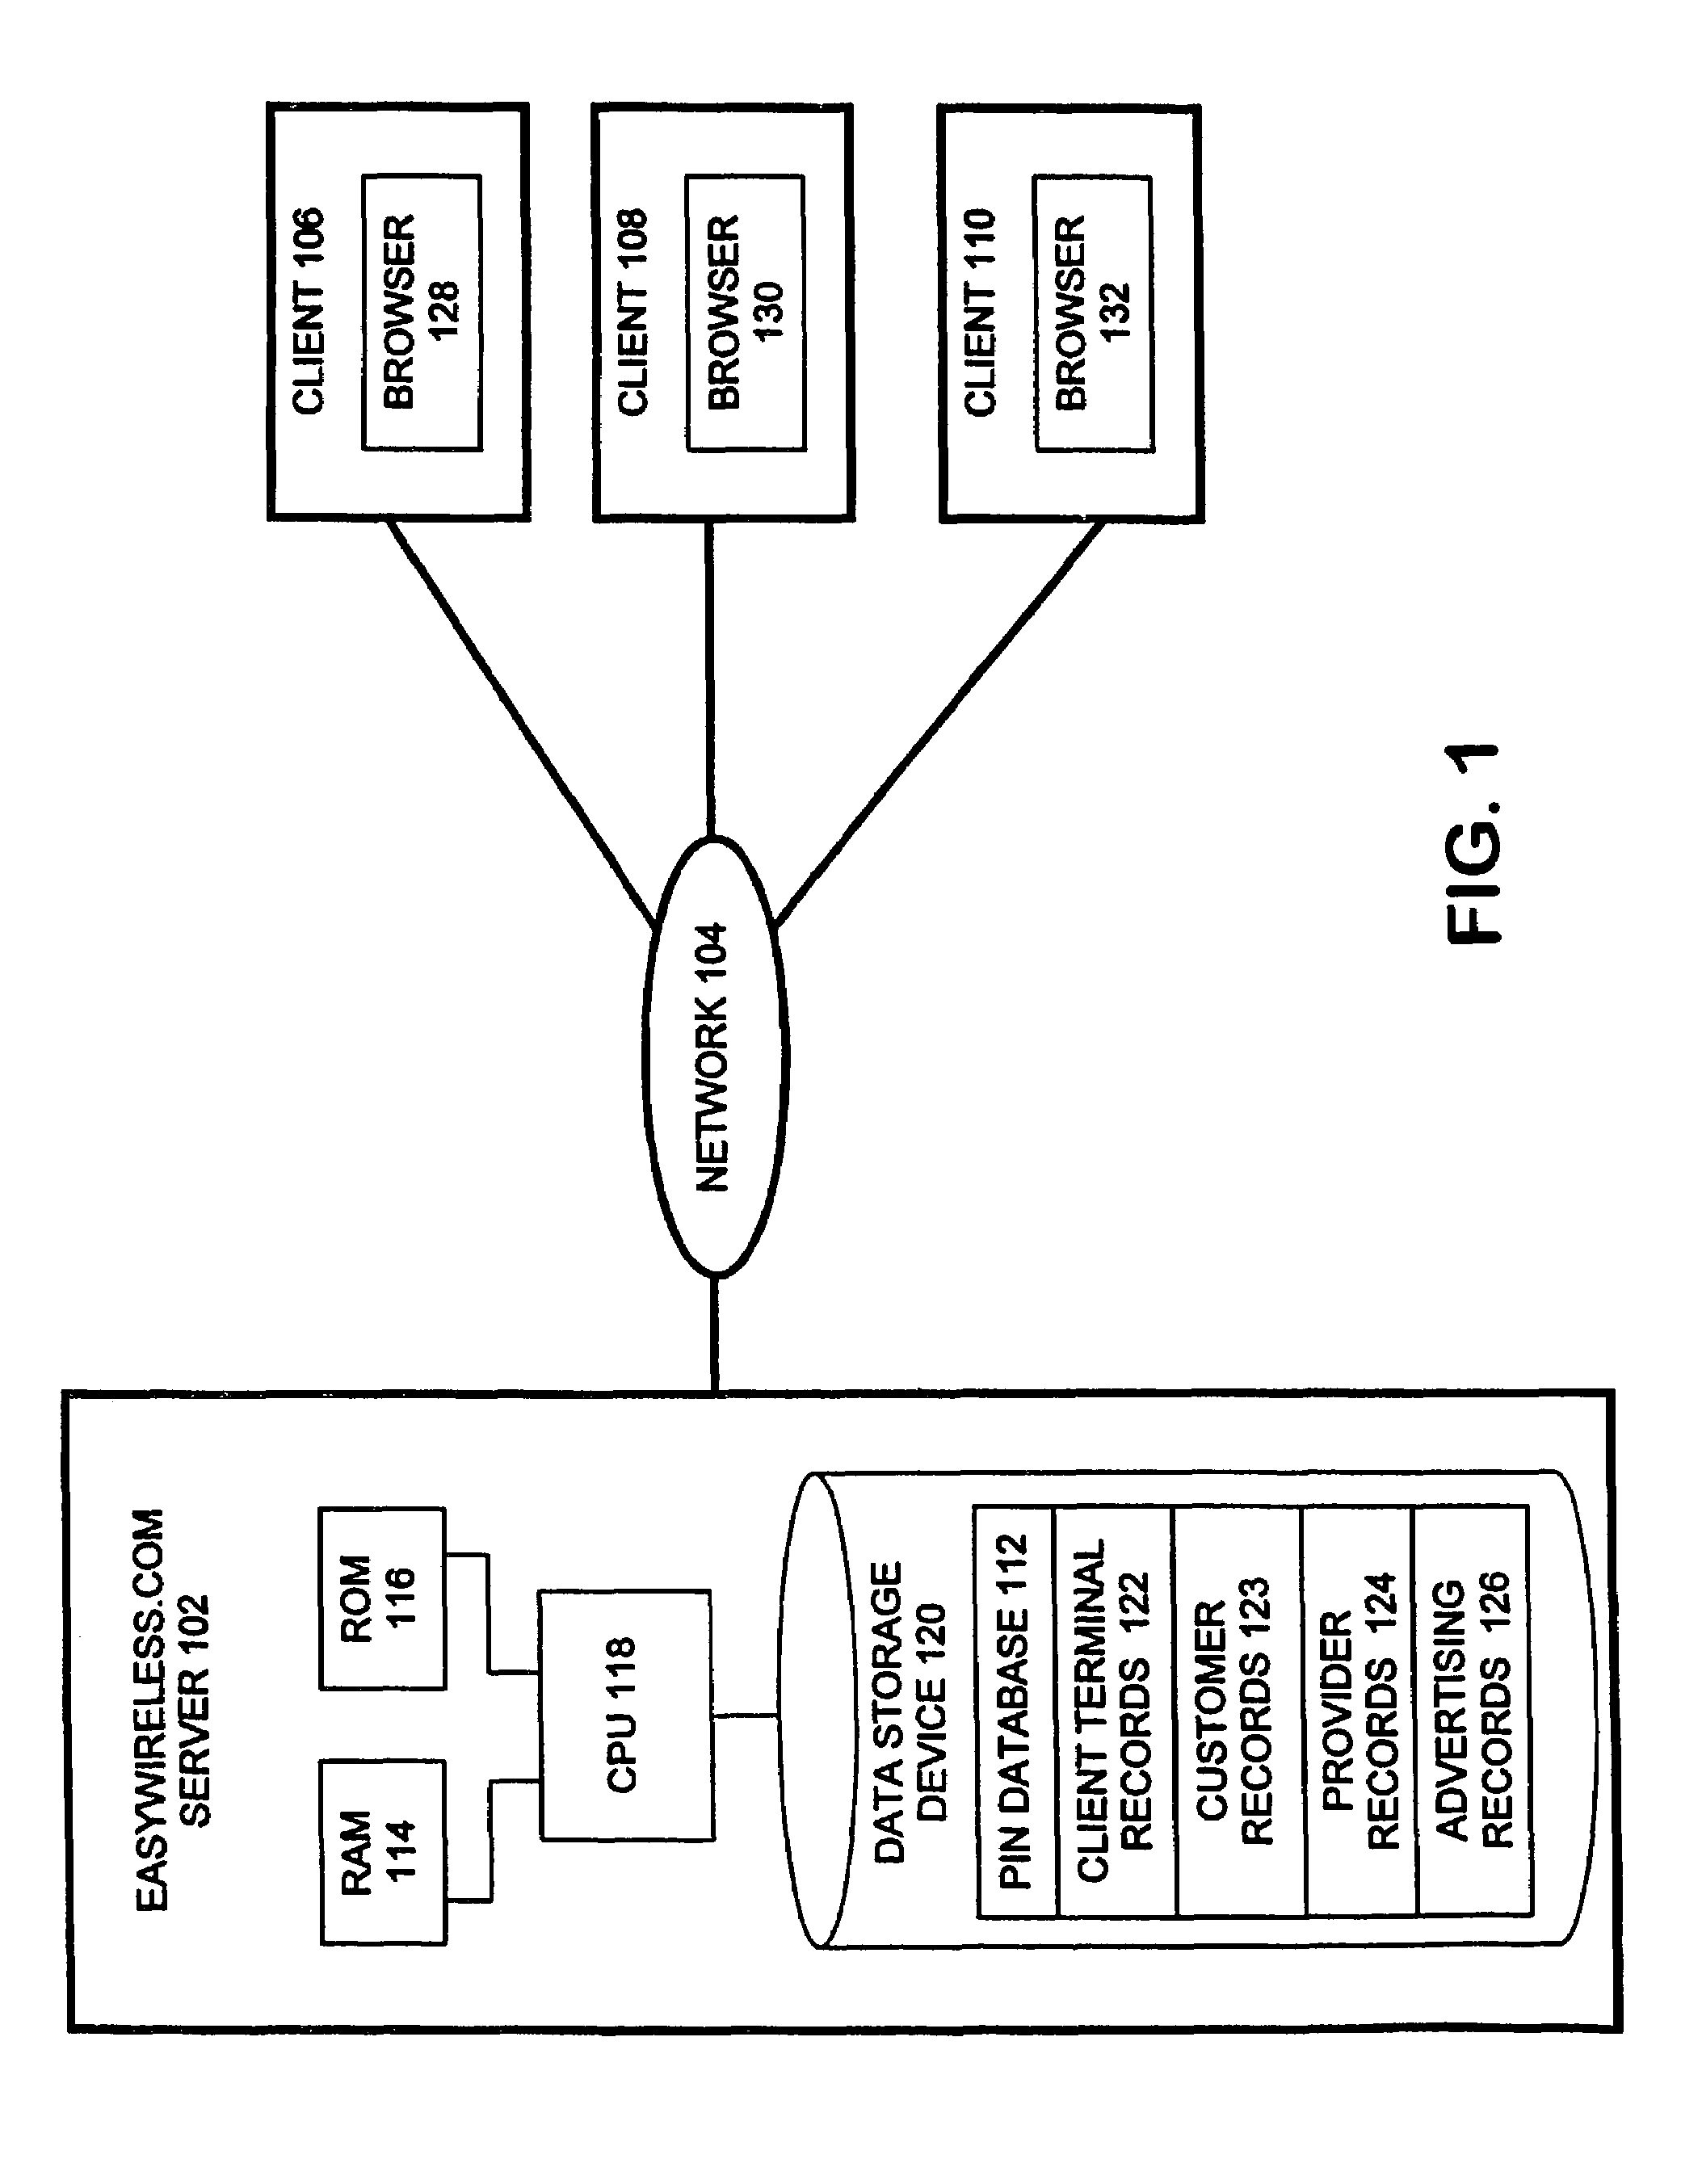 System and method for distributing personal identification numbers over a computer network